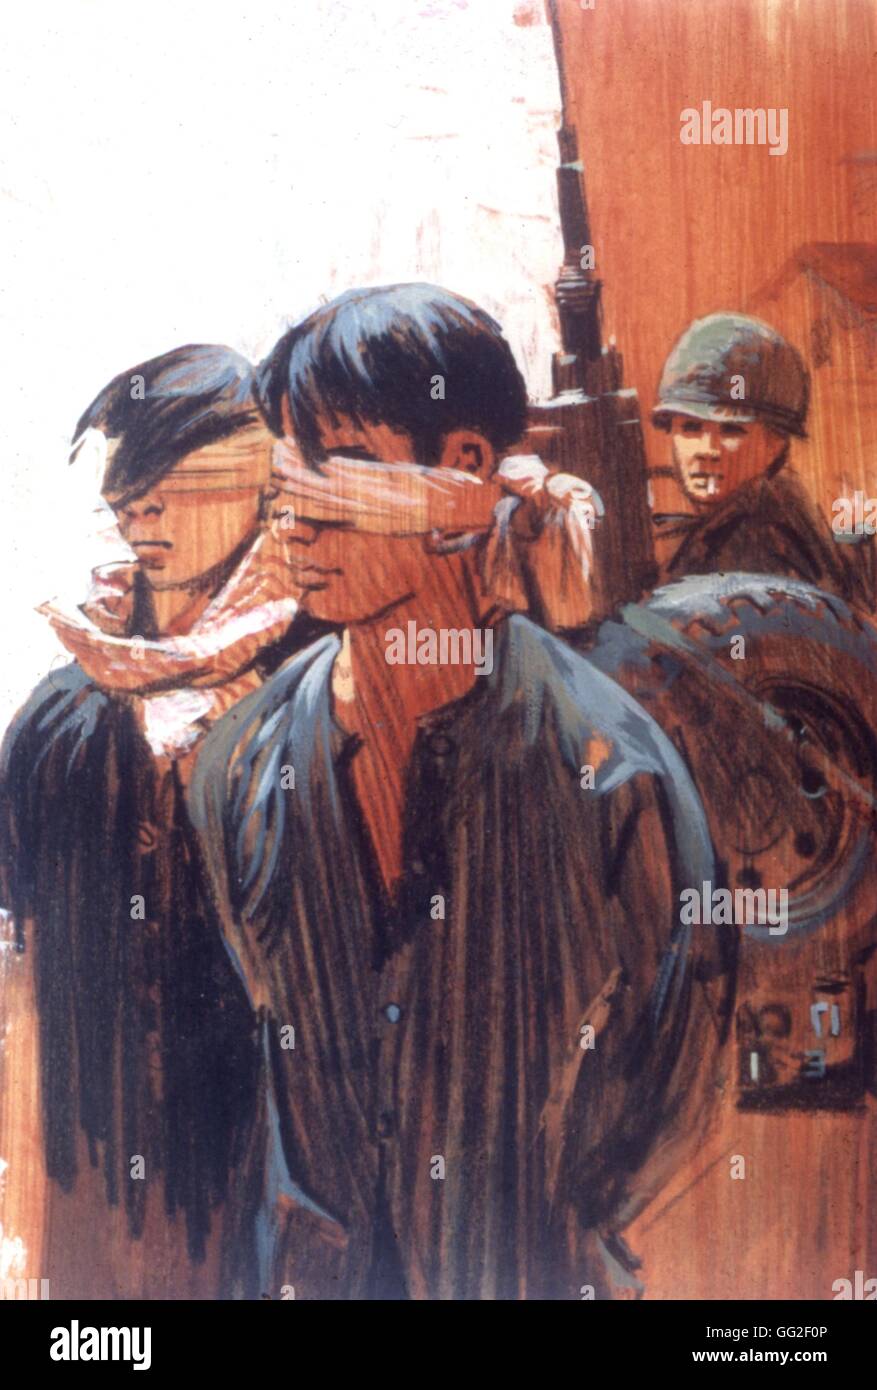 Painting by Ronald A. Wilson. 'Vietcongs arrested by soldiers of the 1st division' 1968 Vietnam War U.S. Army Stock Photo